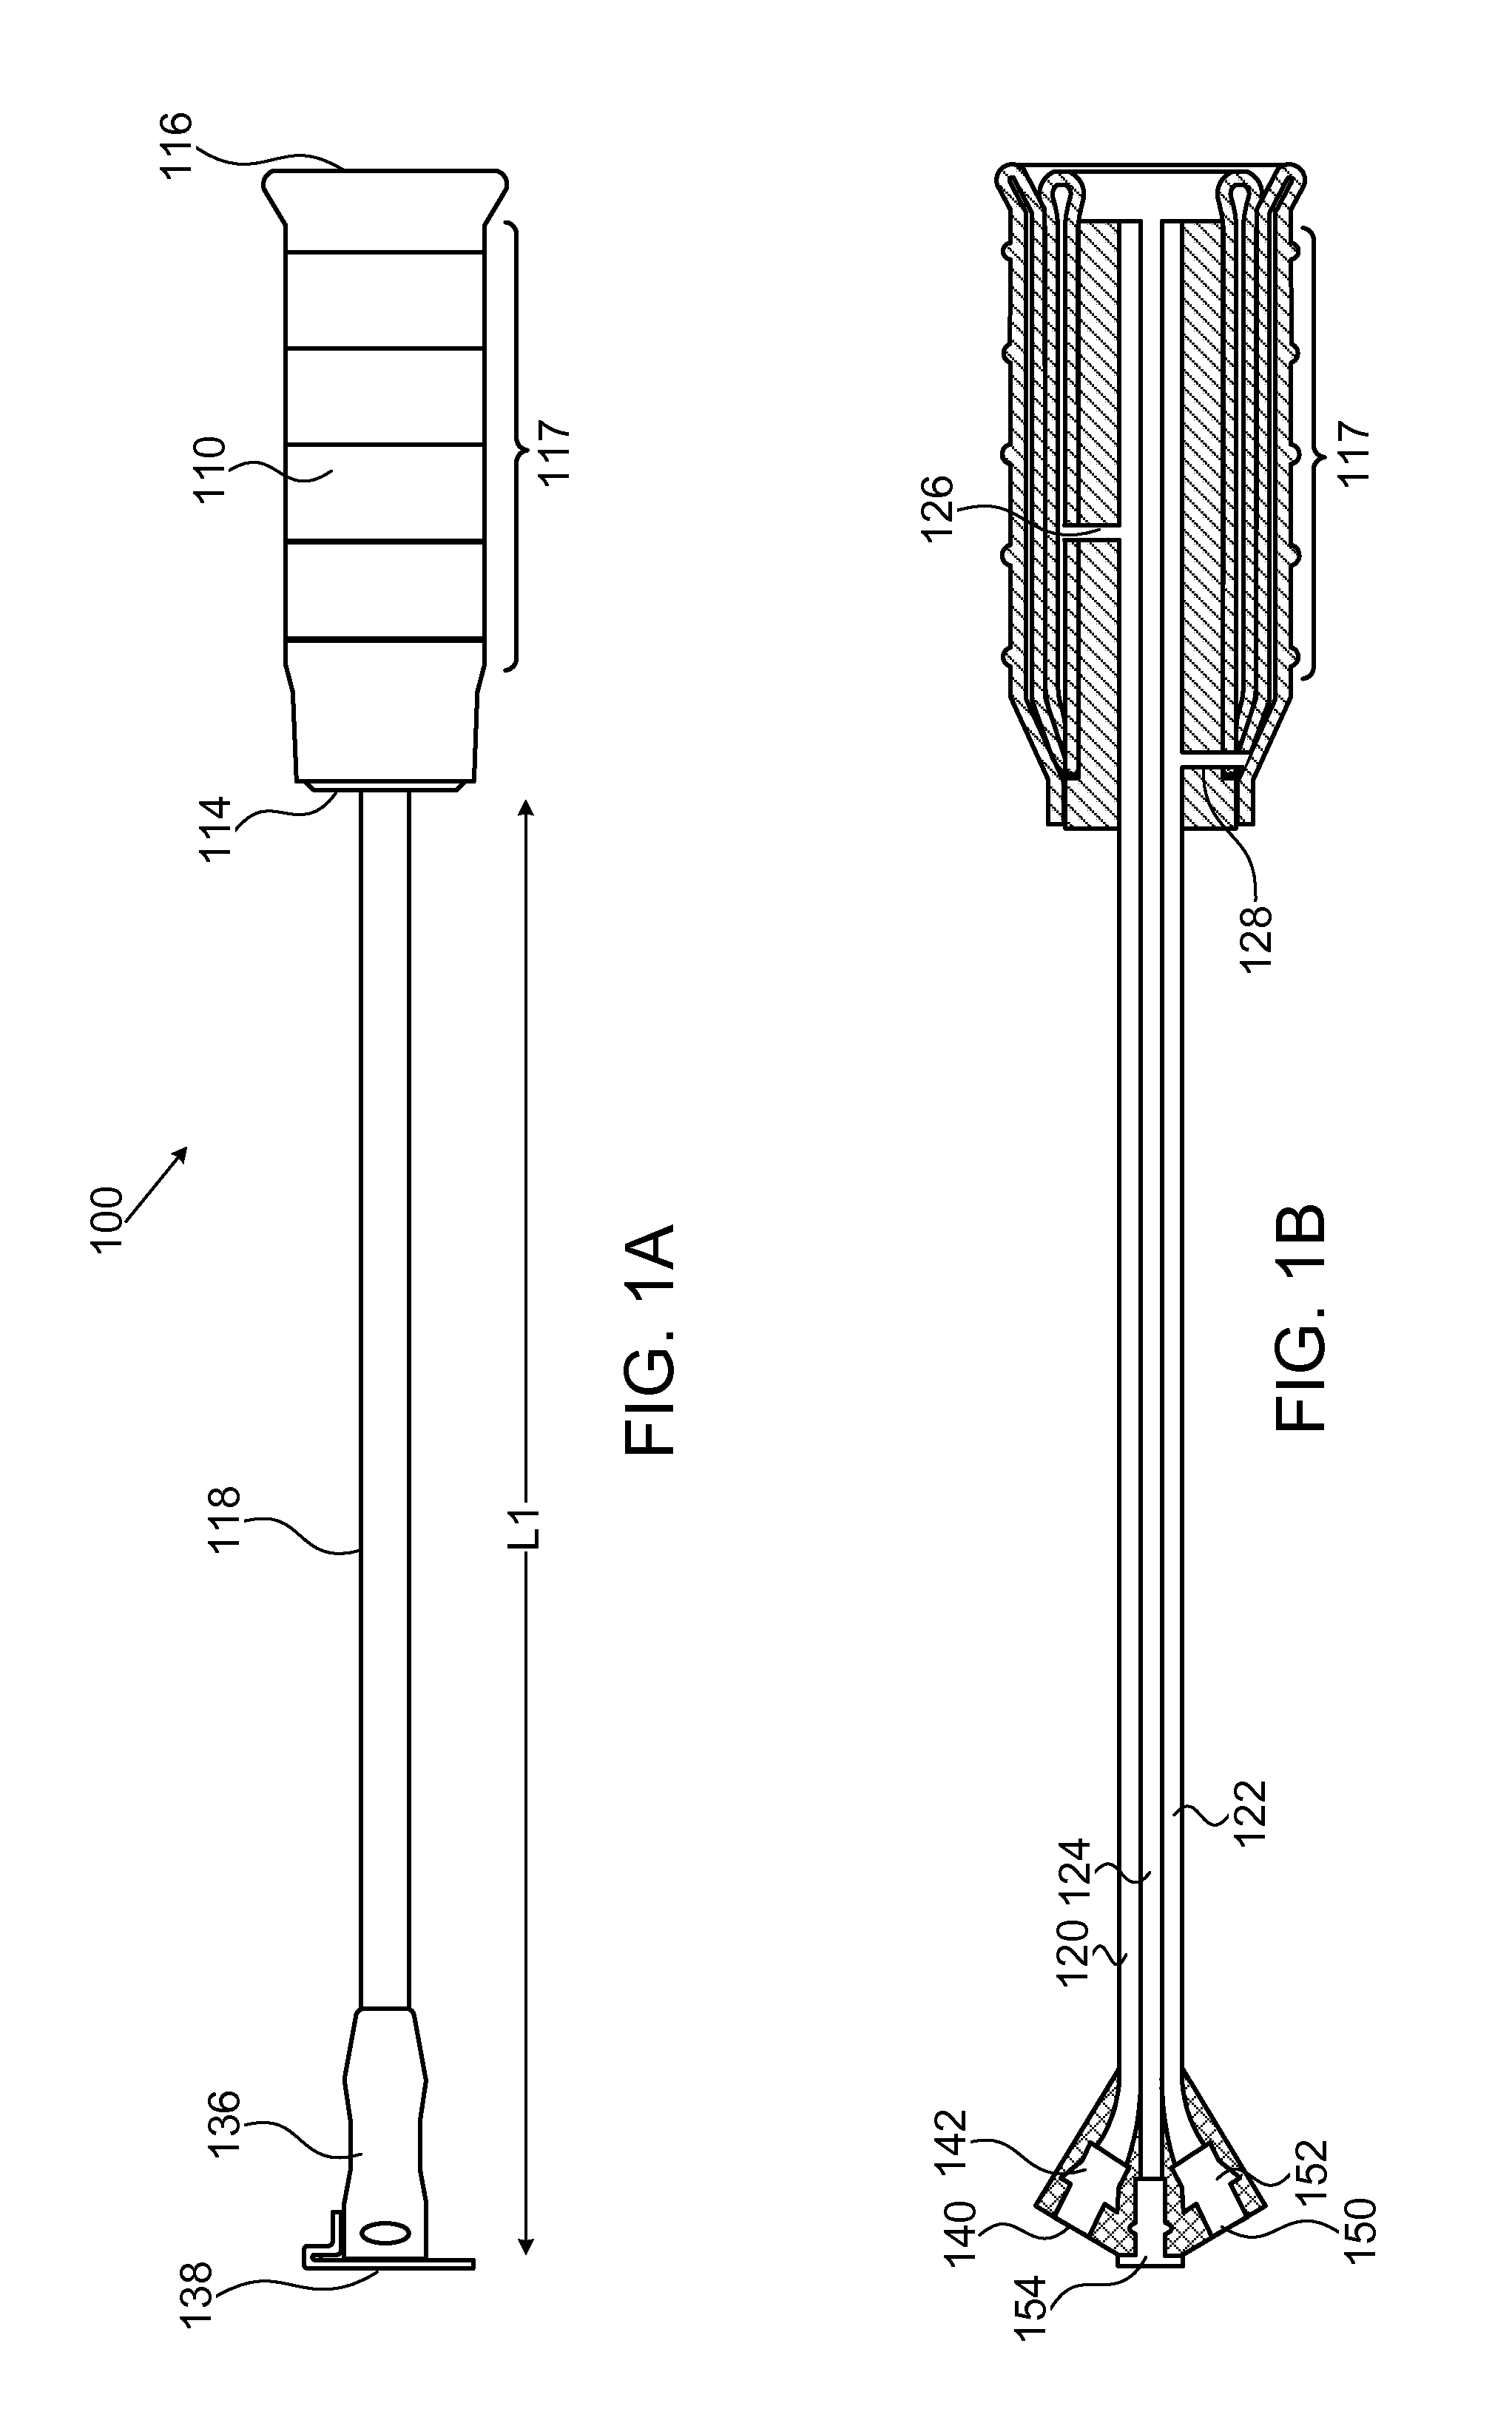 Stent devices for support, controlled drug delivery and pain management after vaginal surgery